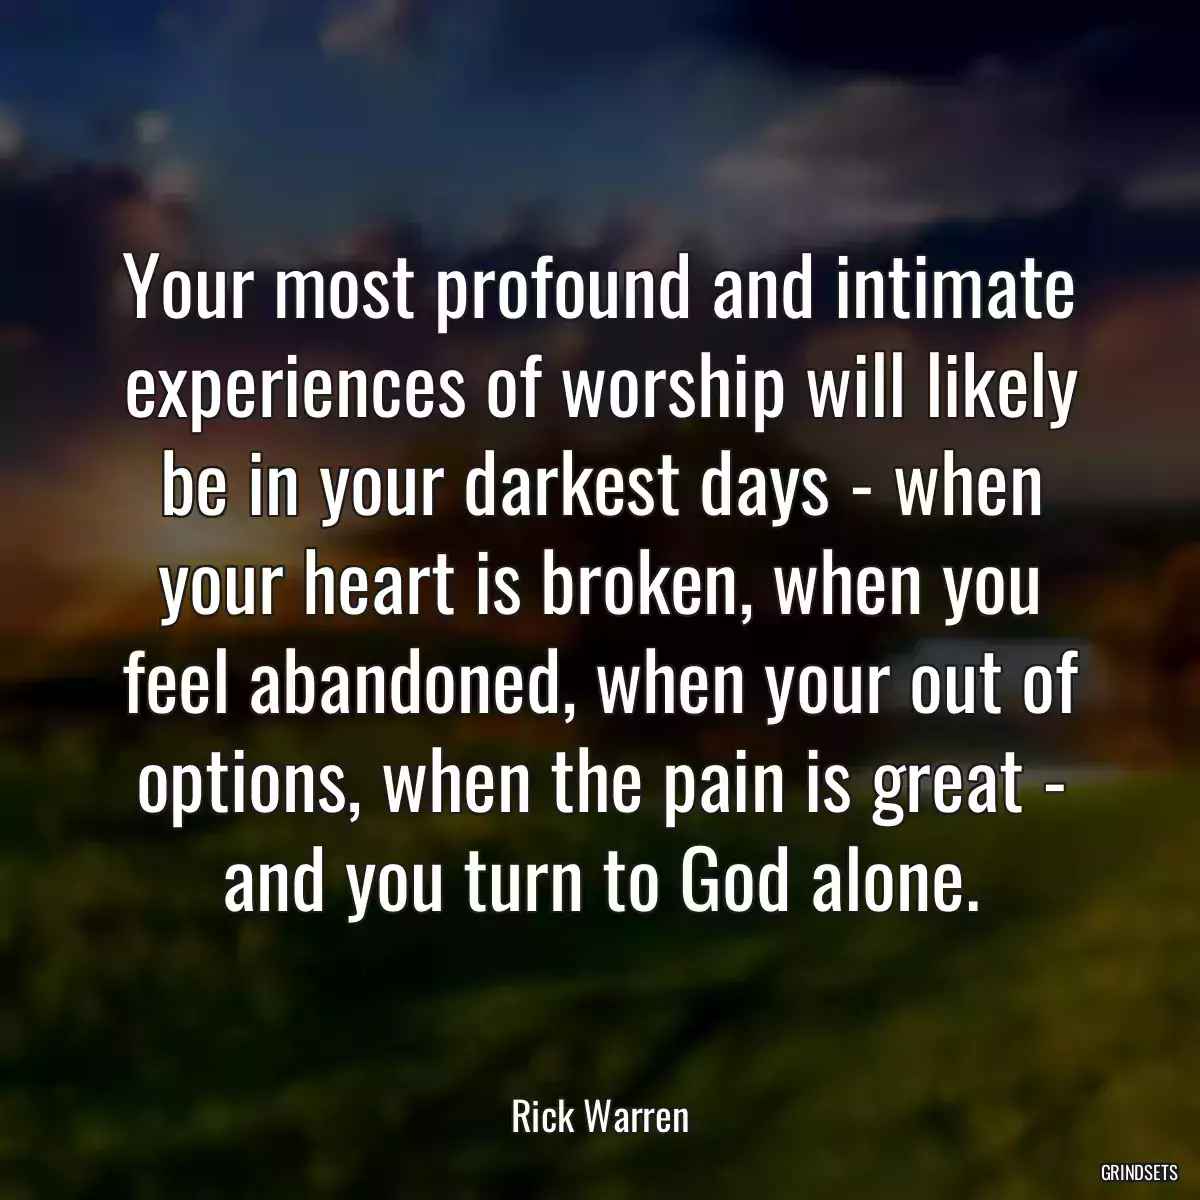 Your most profound and intimate experiences of worship will likely be in your darkest days - when your heart is broken, when you feel abandoned, when your out of options, when the pain is great - and you turn to God alone.